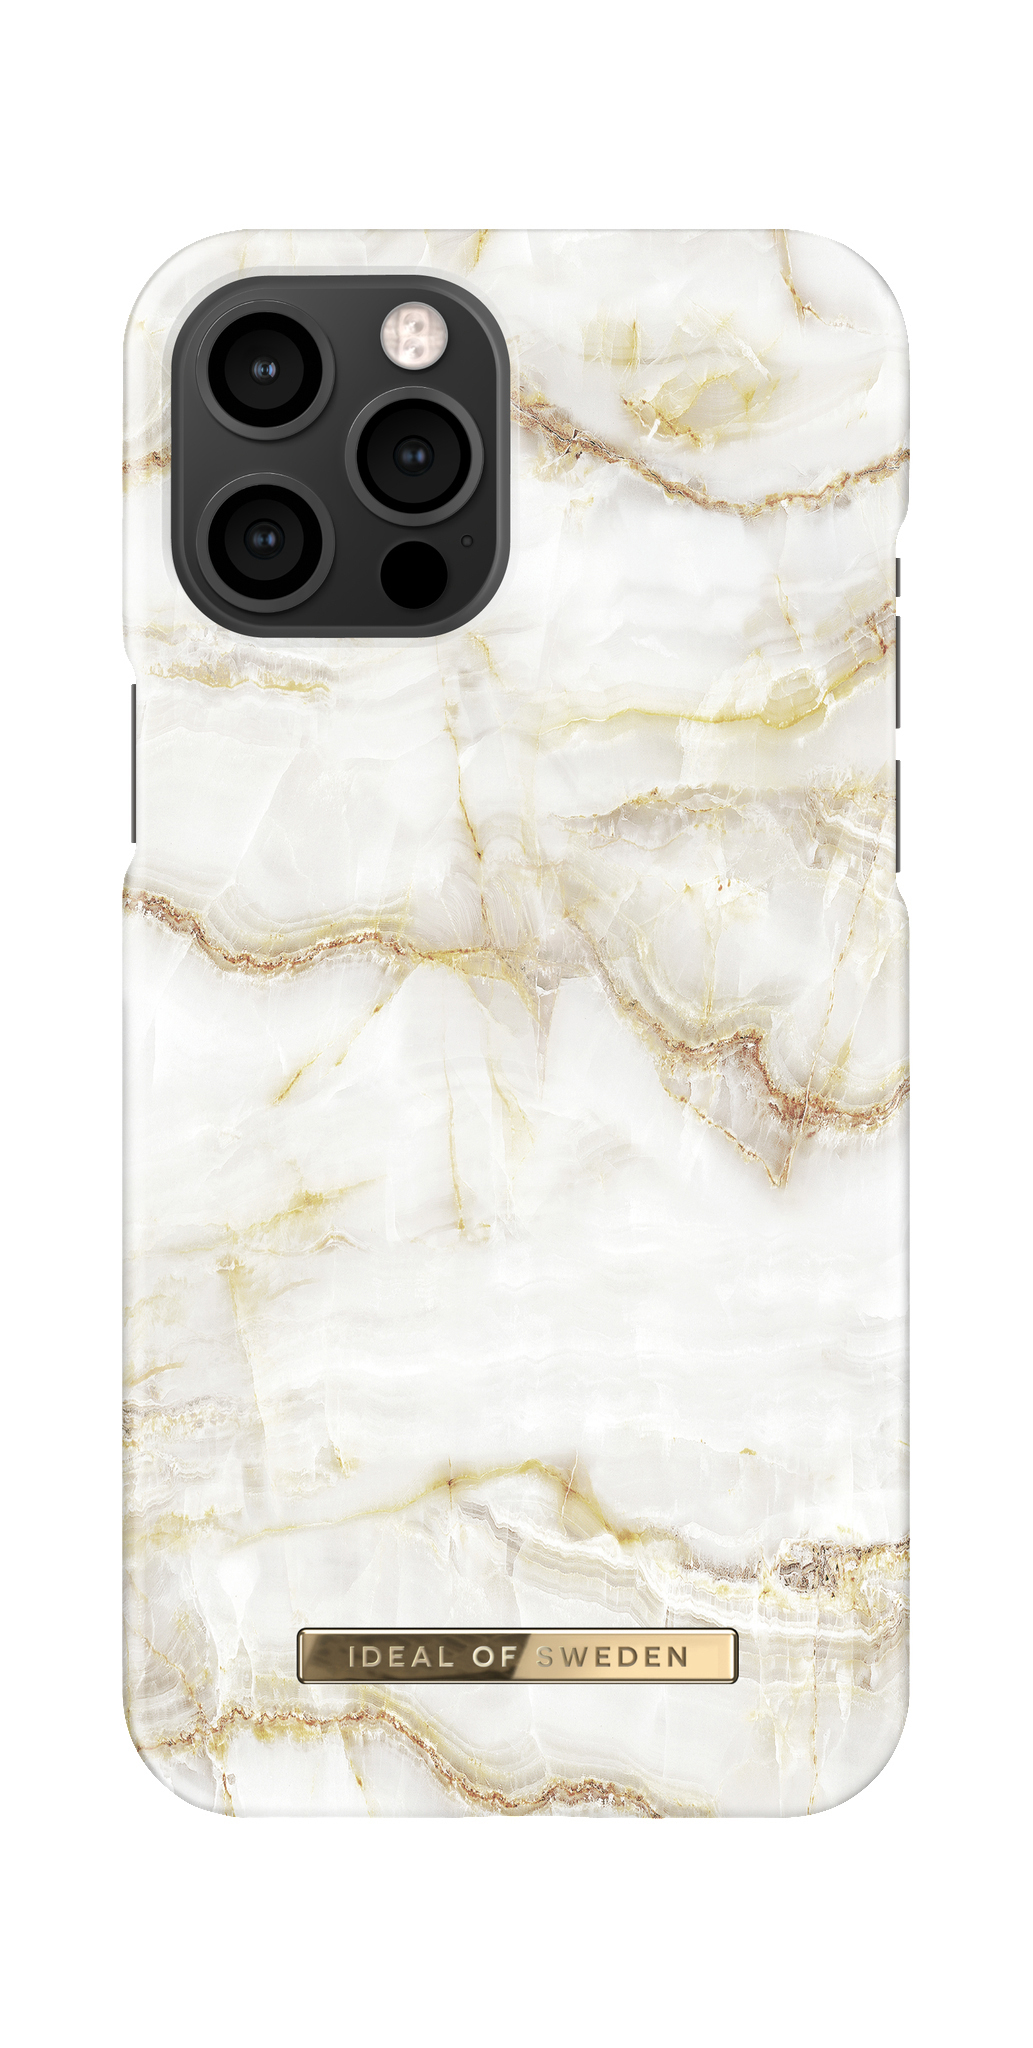 IDEAL Pearl Apple, Backcover, 12 Golden Fashion OF iPhone Marble Max, SWEDEN Case, Pro